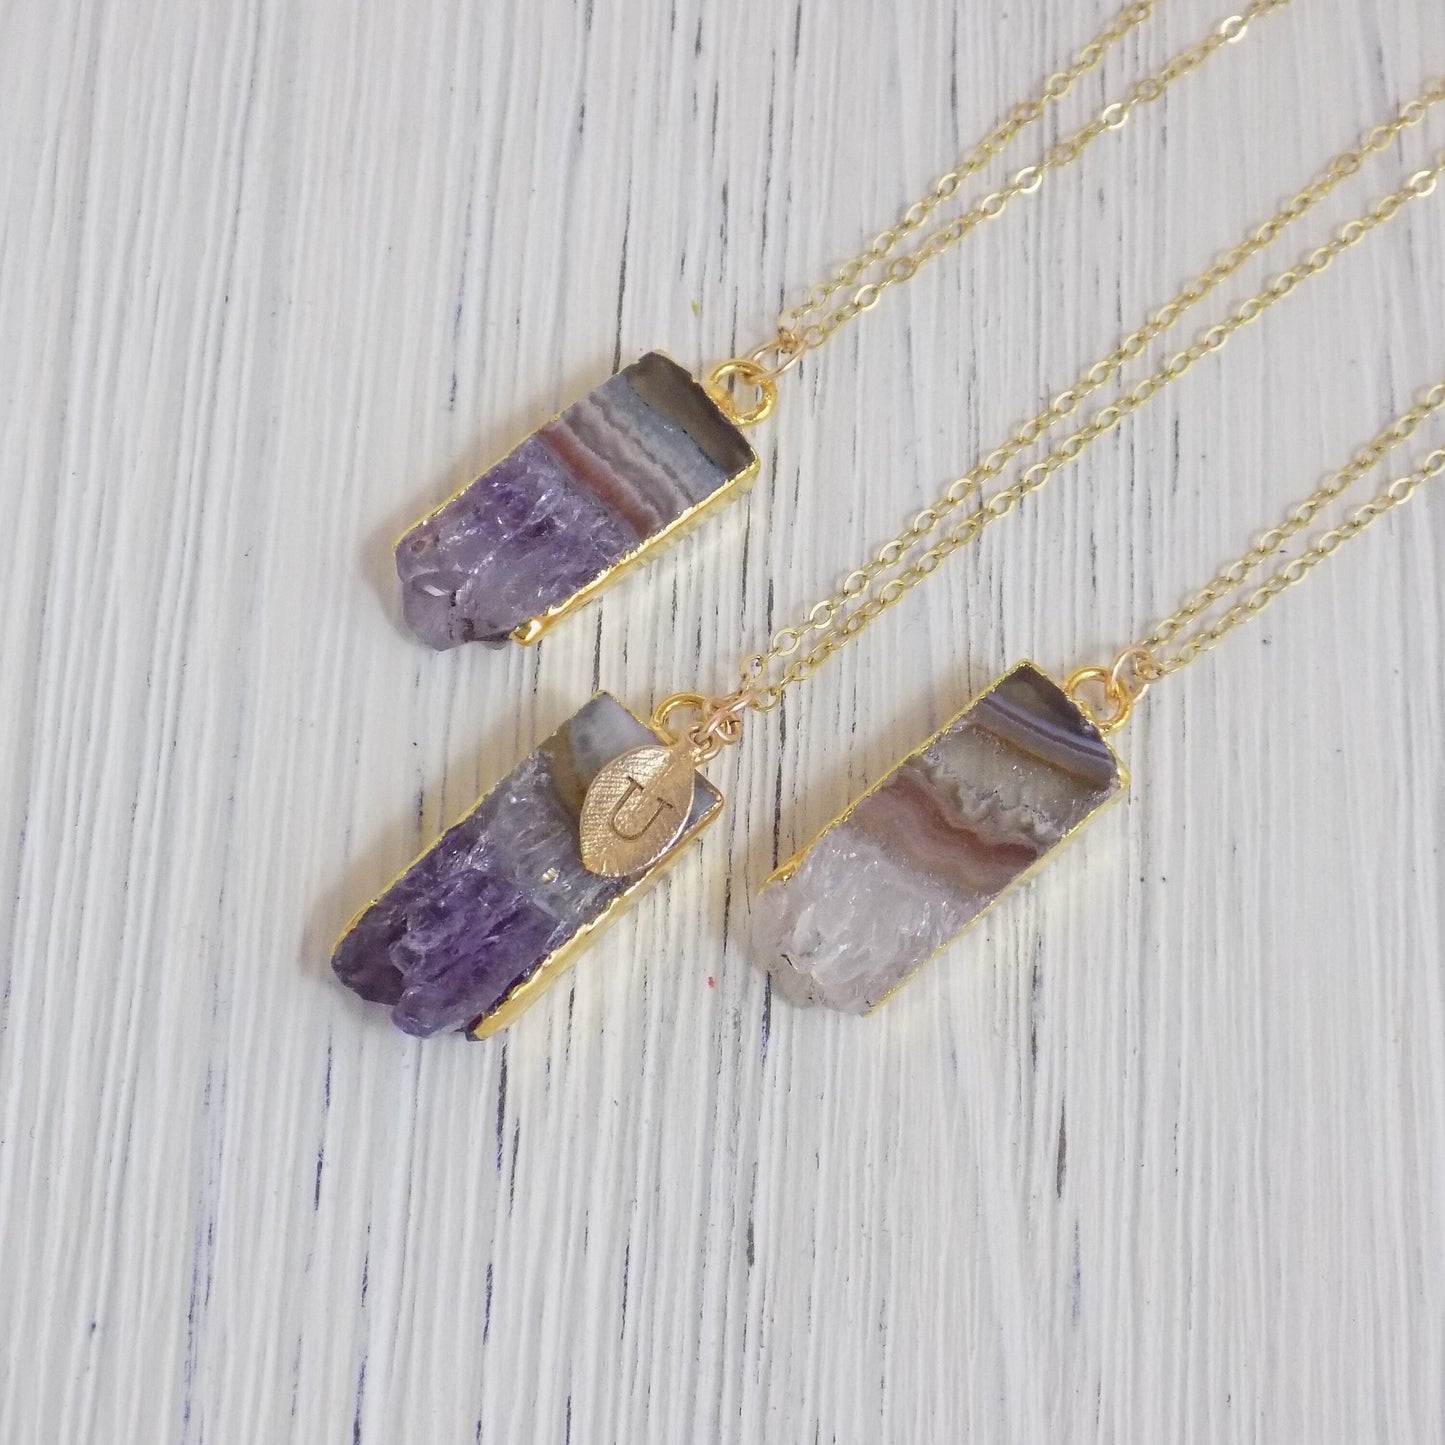 Personalized Necklace, Crystal Necklace, Amethyst Slice, Initial Necklace, Gold Amethyst, Druzy Necklace, Purple Crystal, Long Layer